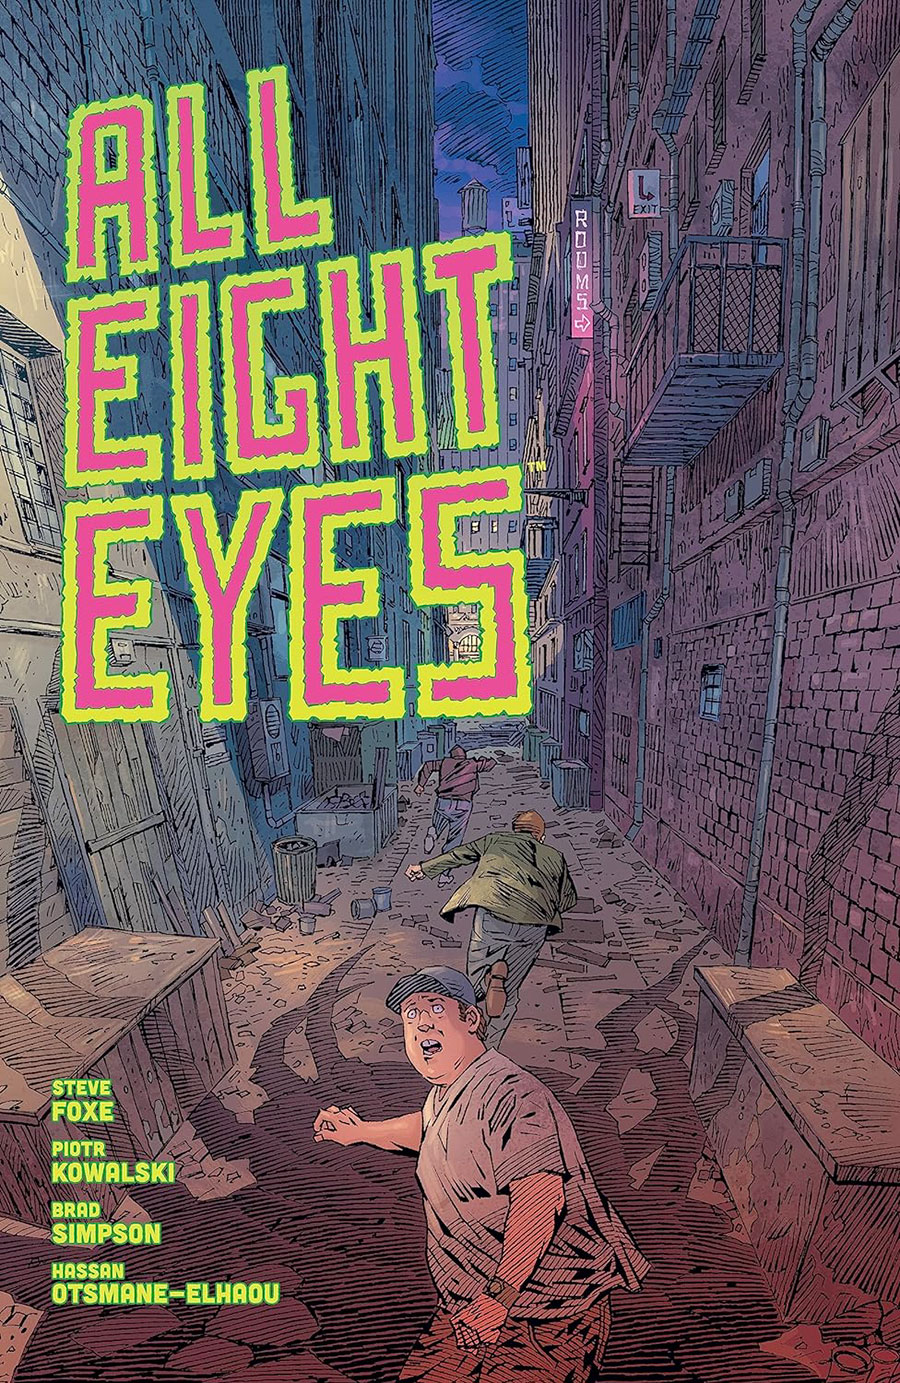 All Eight Eyes TP